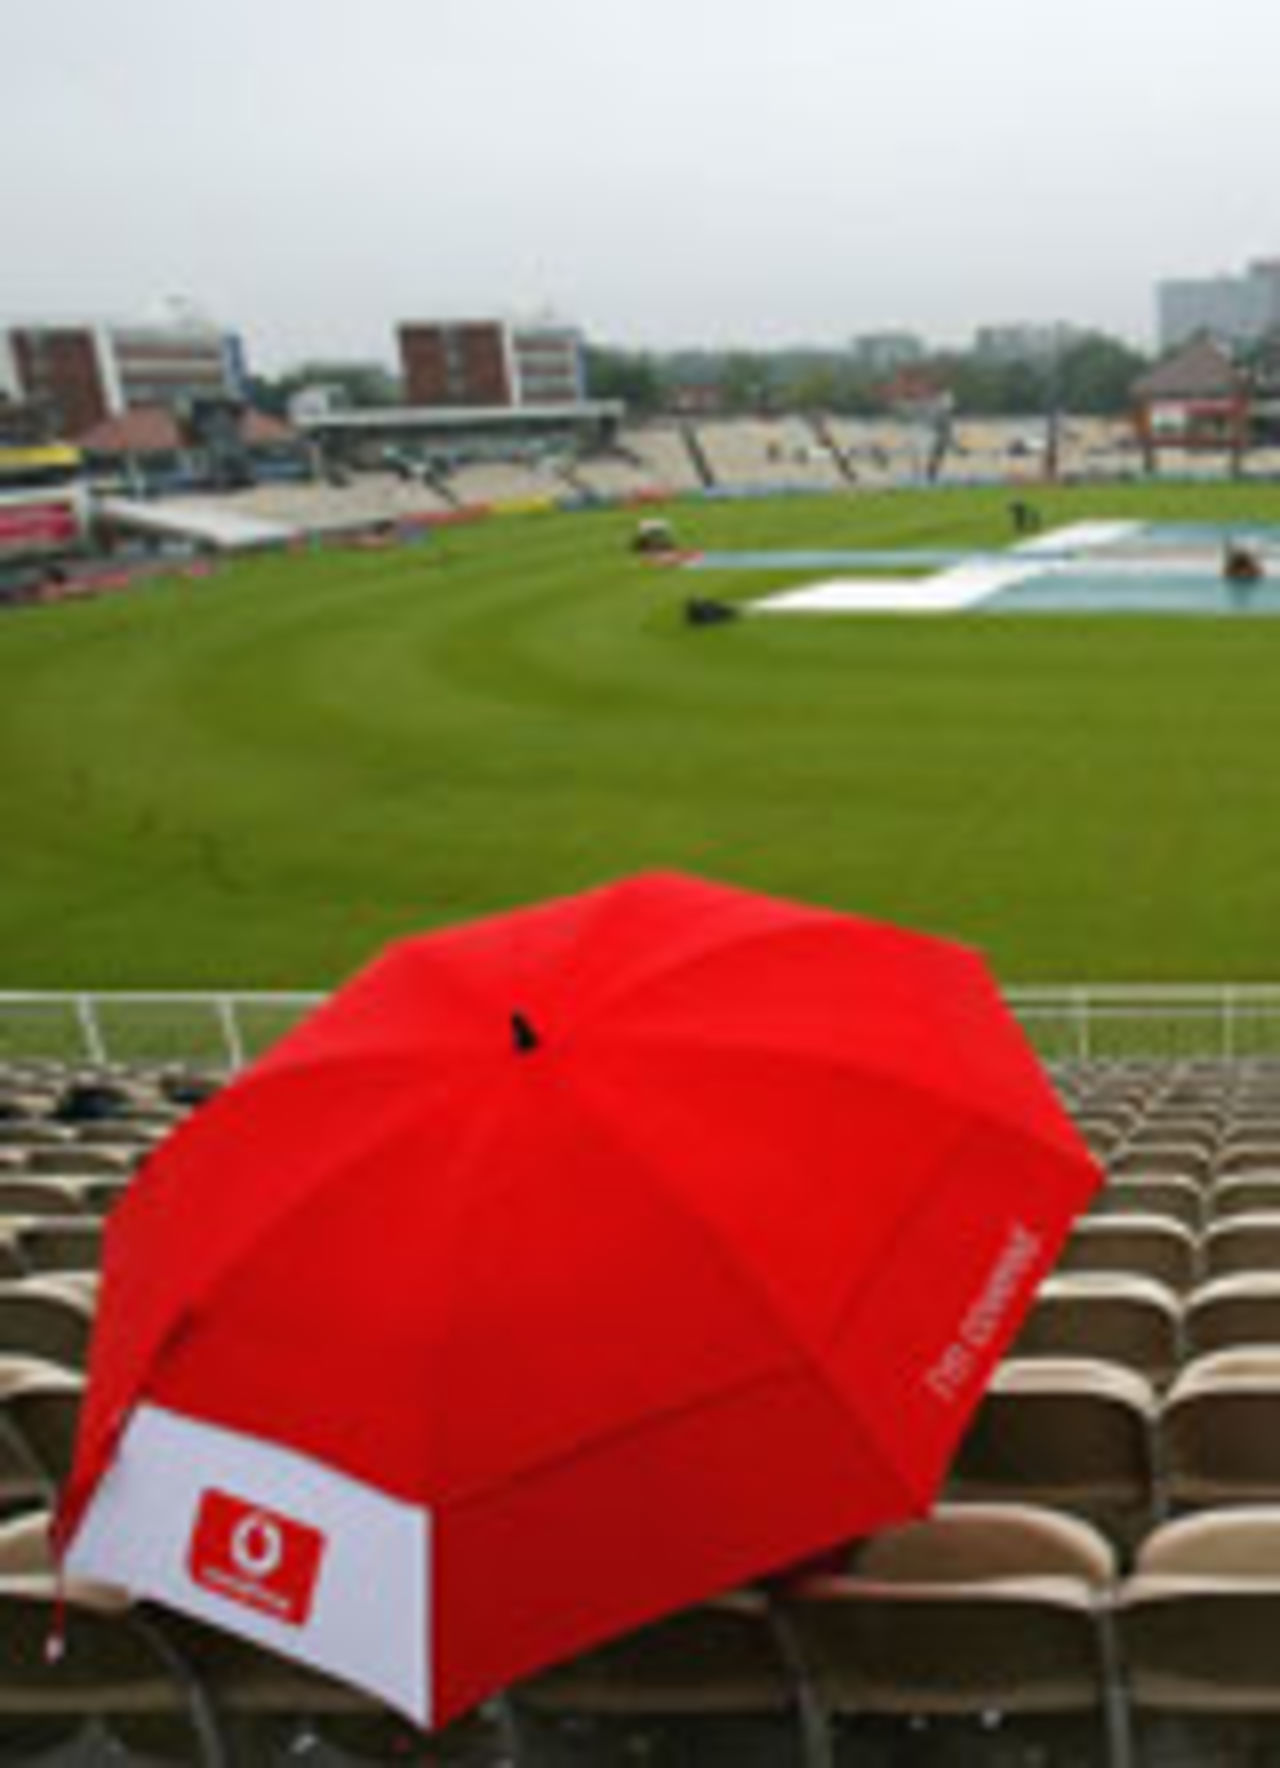 A wet Old Trafford, England v West Indies, 3rd Test, August 13, 2004